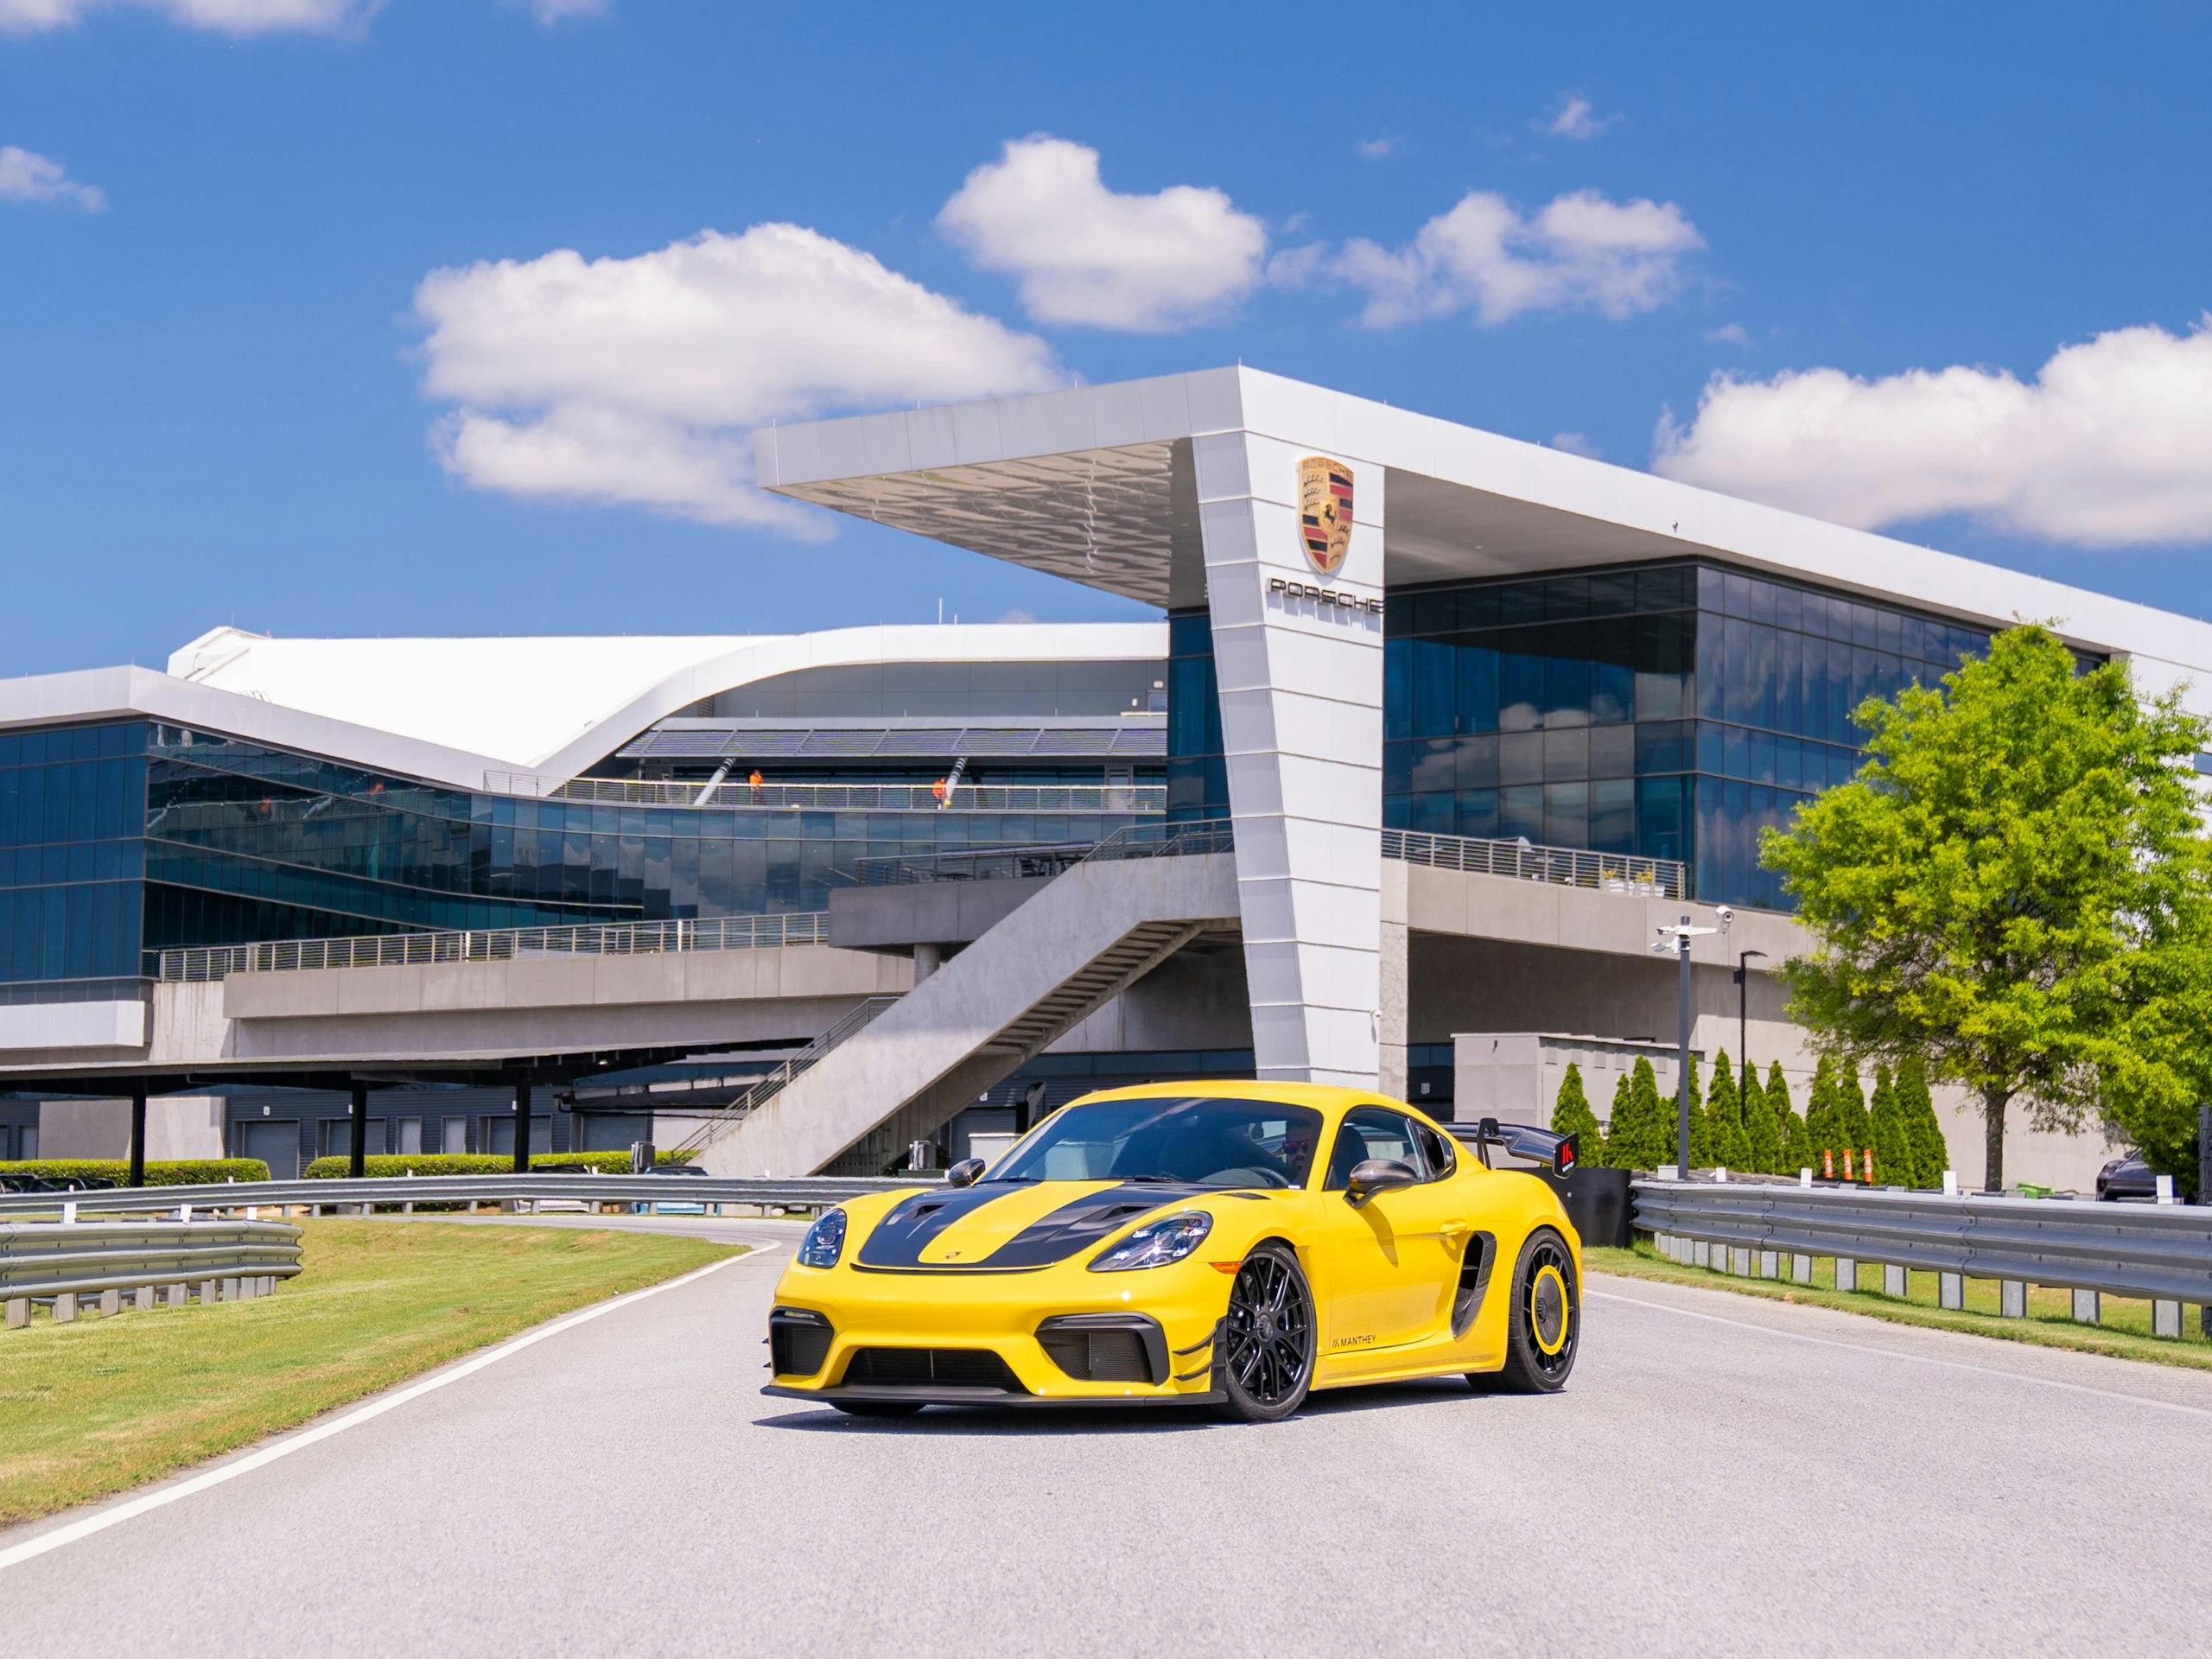 A yellow Cayman GT4 RS with Manthey Package sits on a road in front of a Porsche building